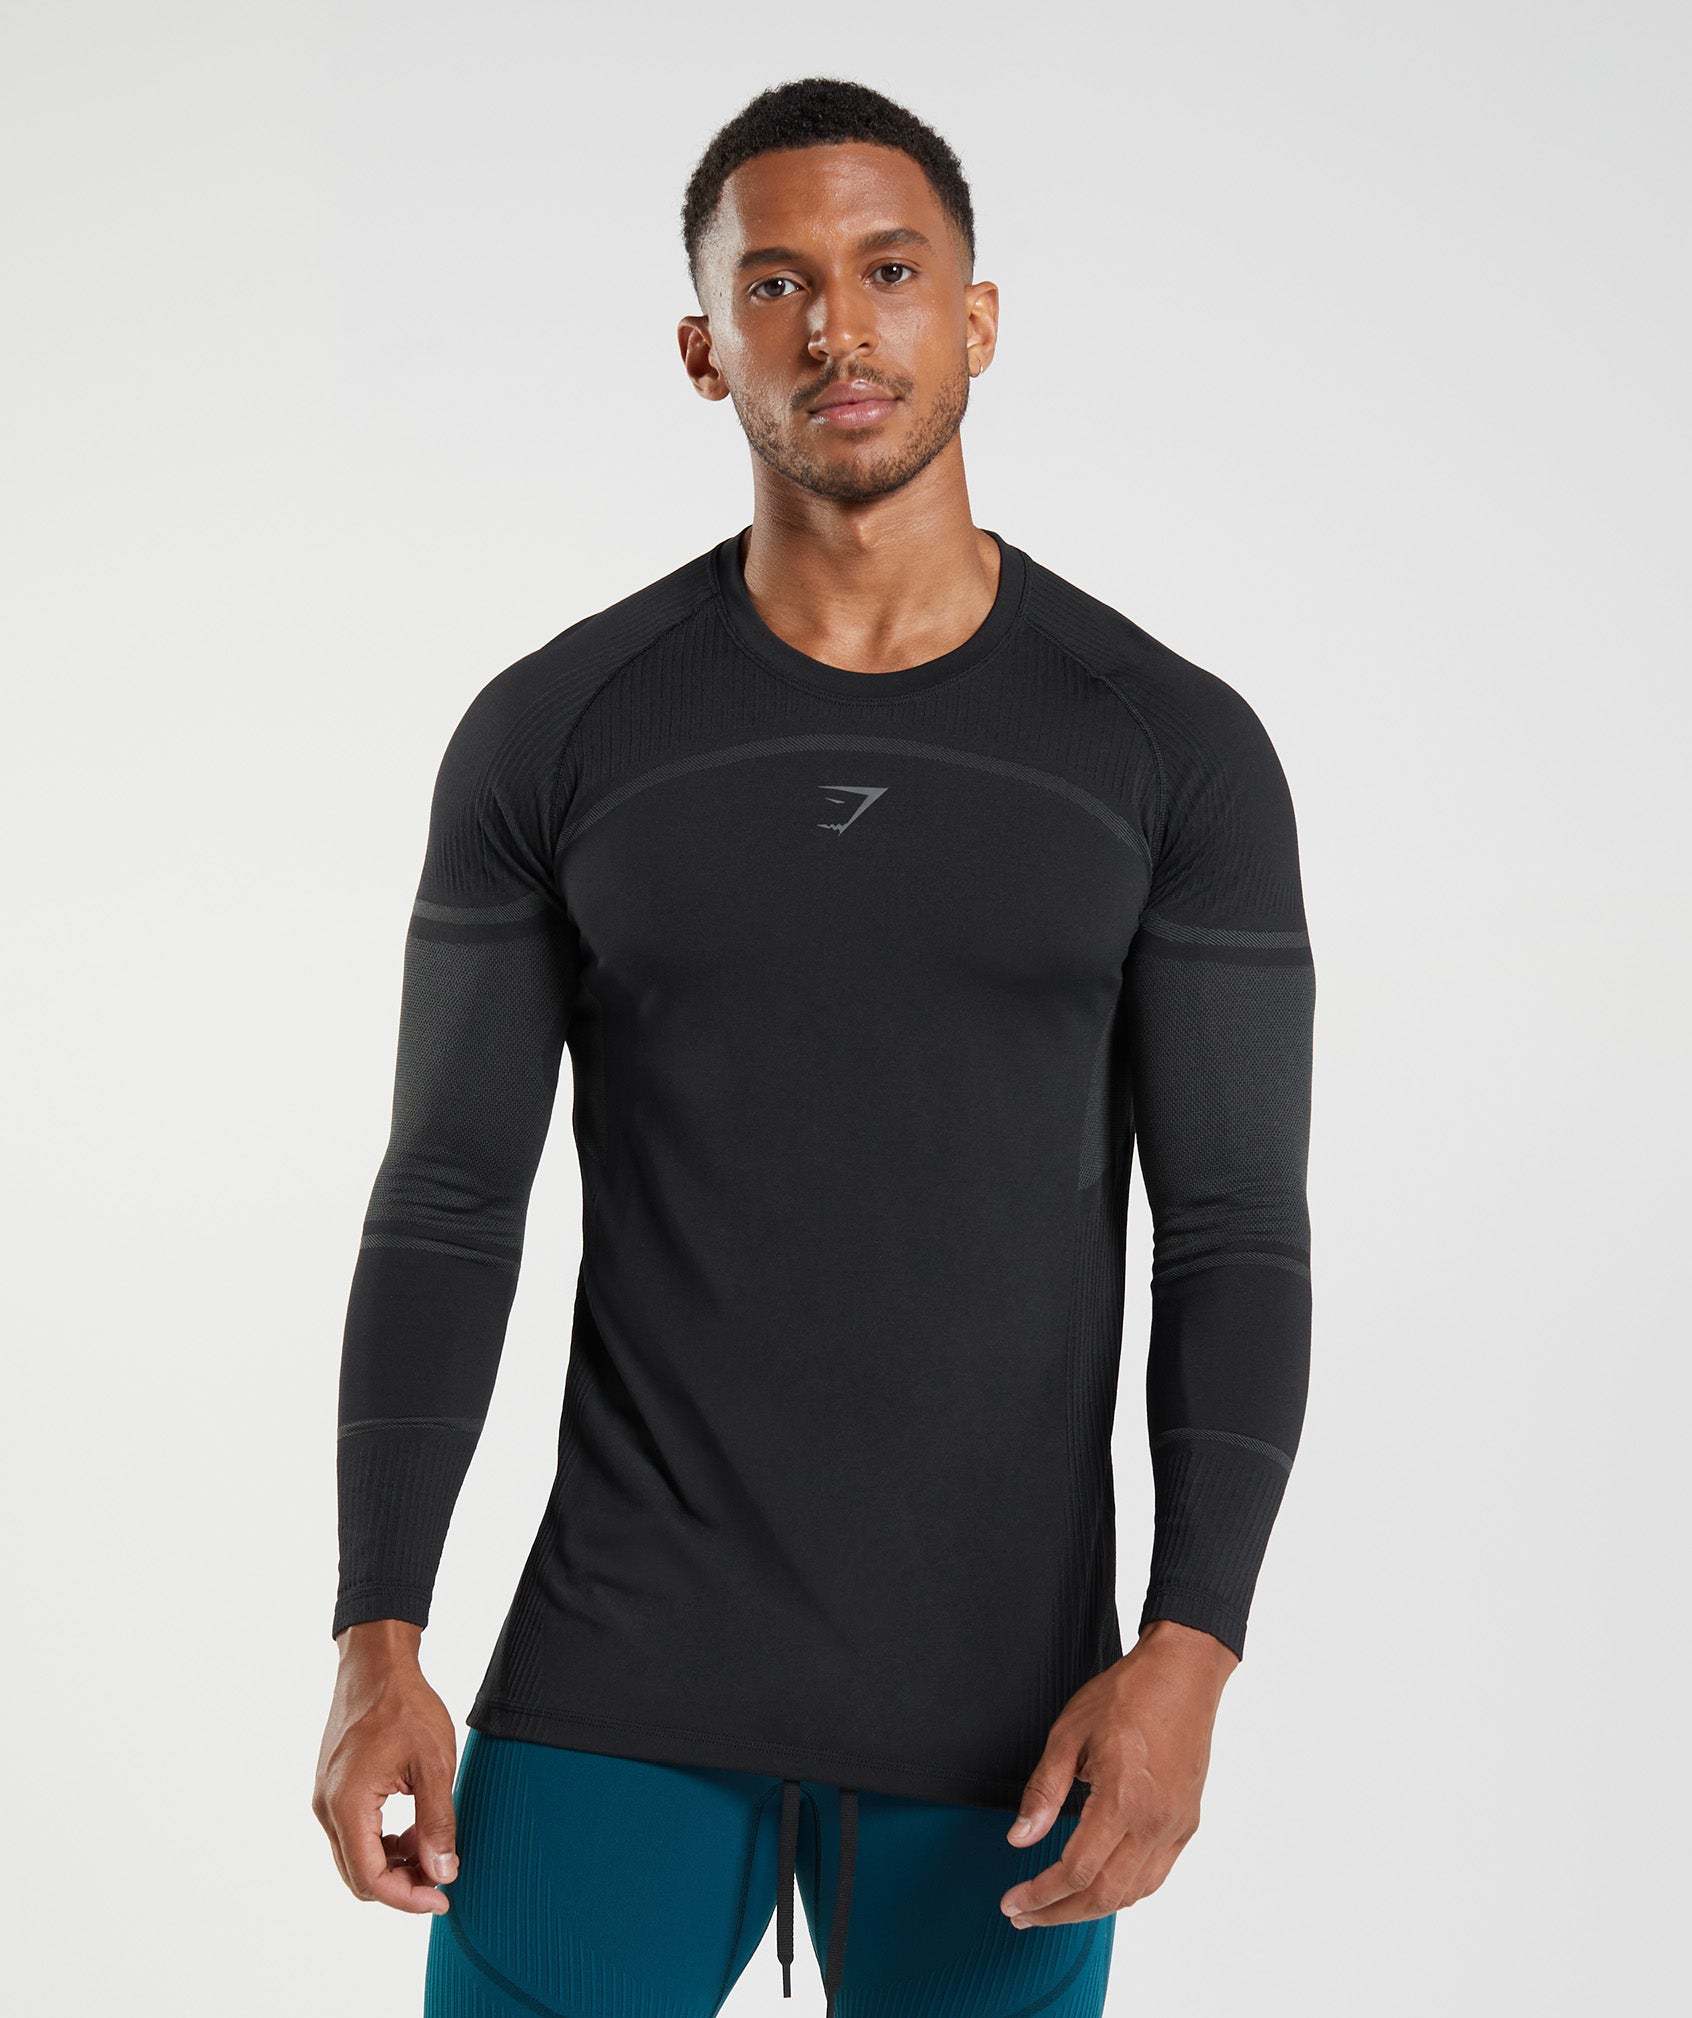 Oversized T Shirts y Baggy T Shirts para Hombre - Gymshark